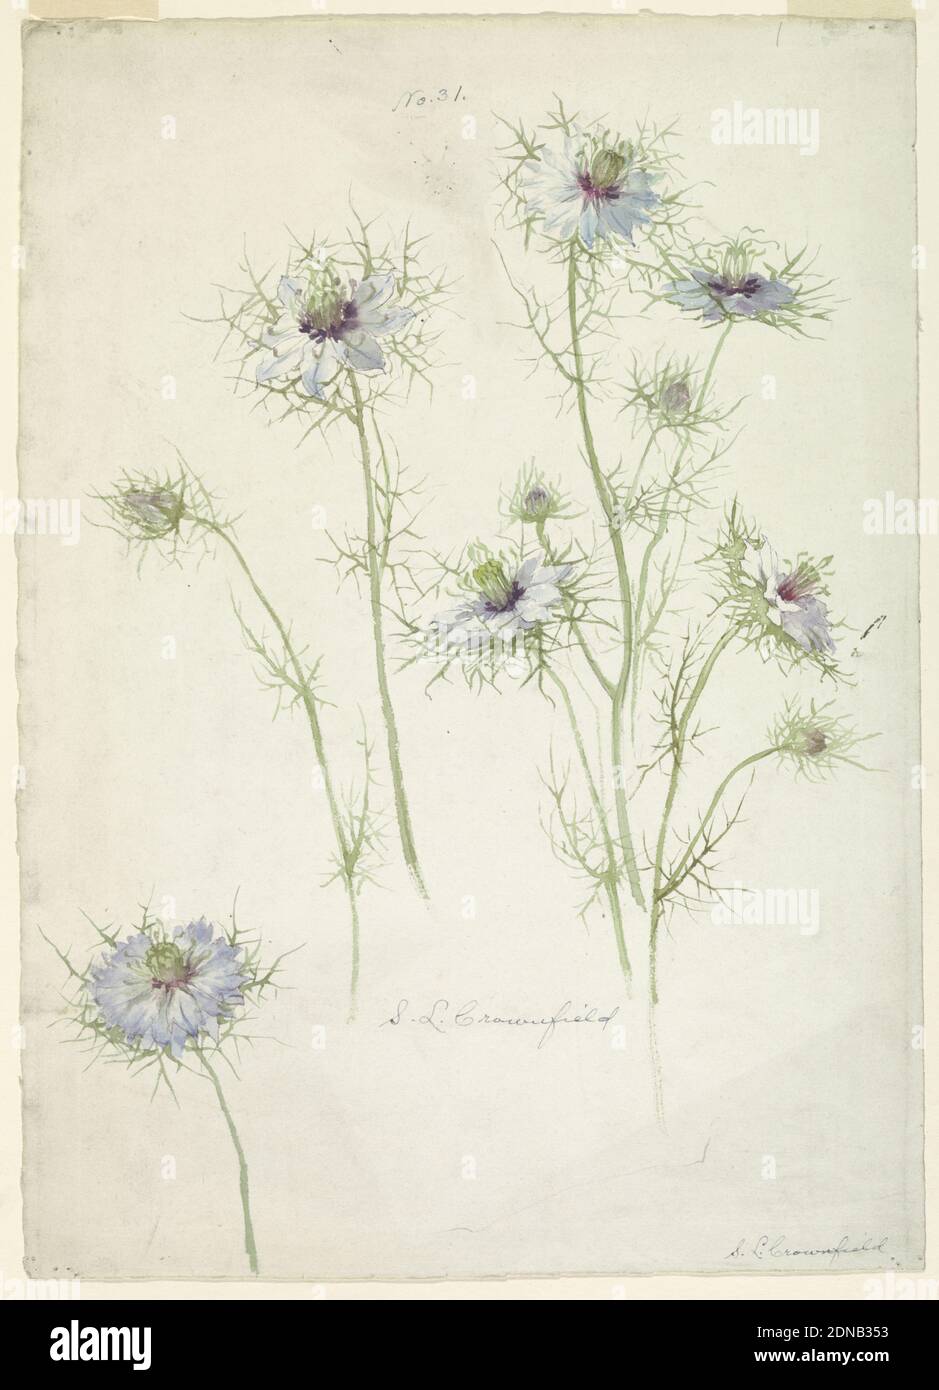 Study of Love-in-a-mist, Sophia L. Crownfield, (American, 1862–1929), Brush and watercolor on white paper, Vertical sheet depicting six stalks of love-in-a-mist with in blue blossoms., USA, late 19th century, nature studies, Drawing Stock Photo